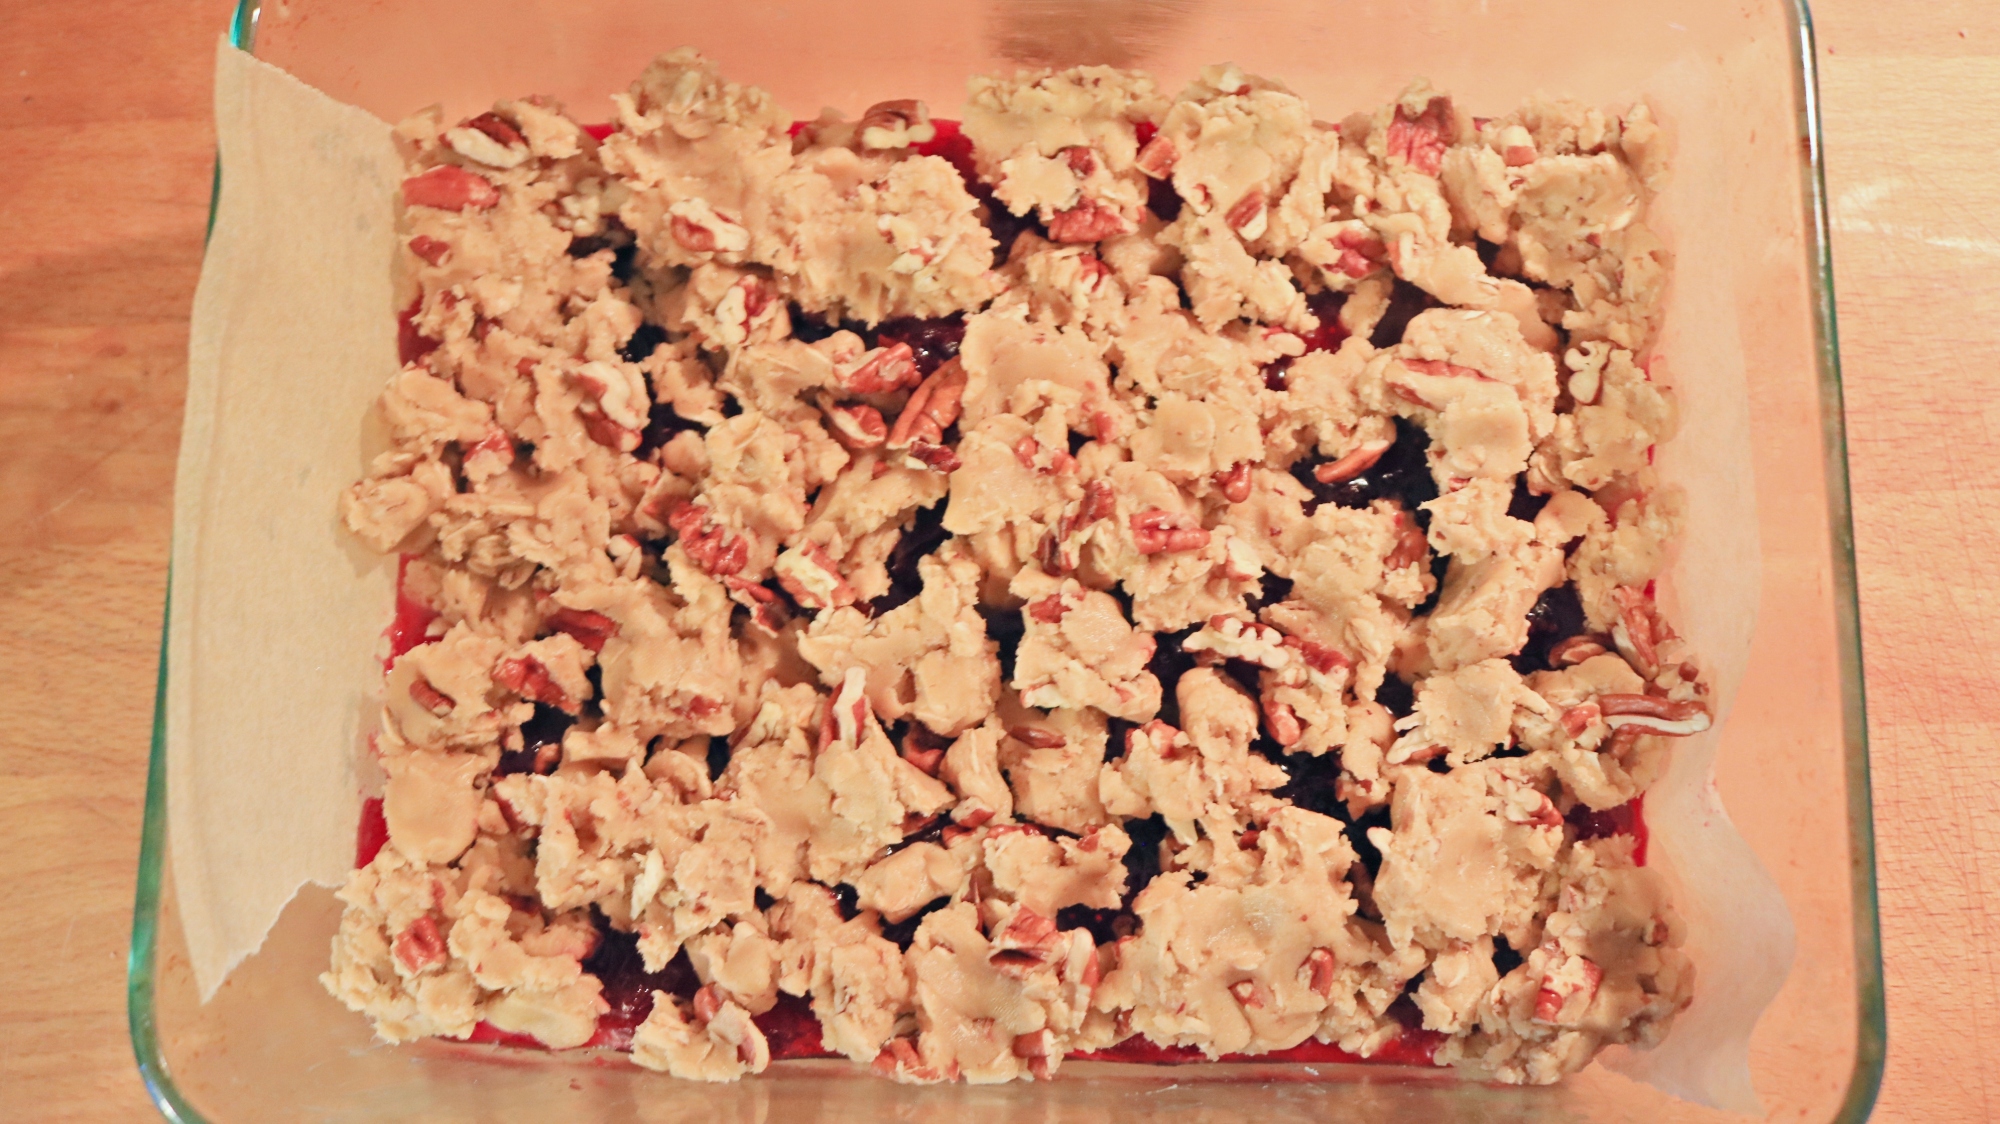 Crumble topping on jam bars.